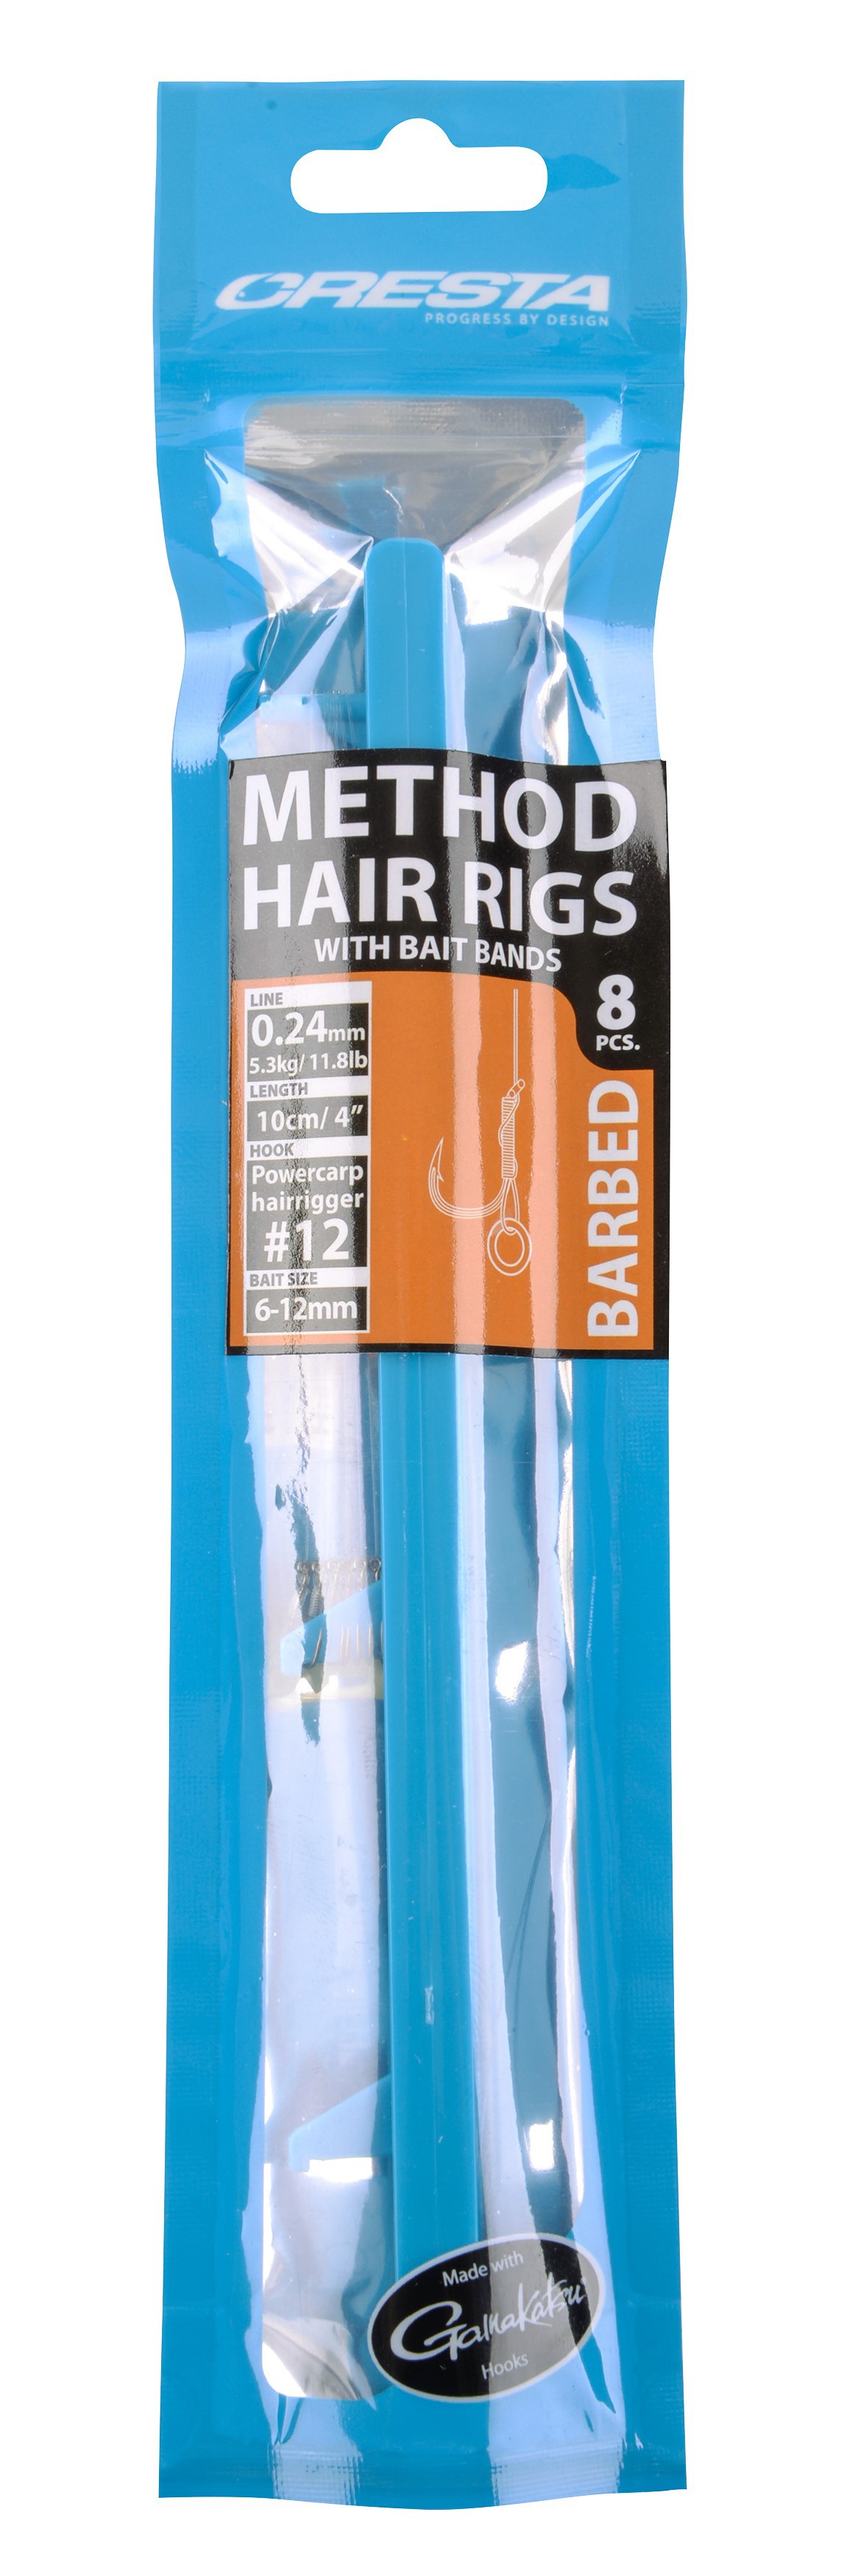 Spro - Cresta Method Hair Rigs With Bait Bands Barbed 4" – 10 cm Size 10